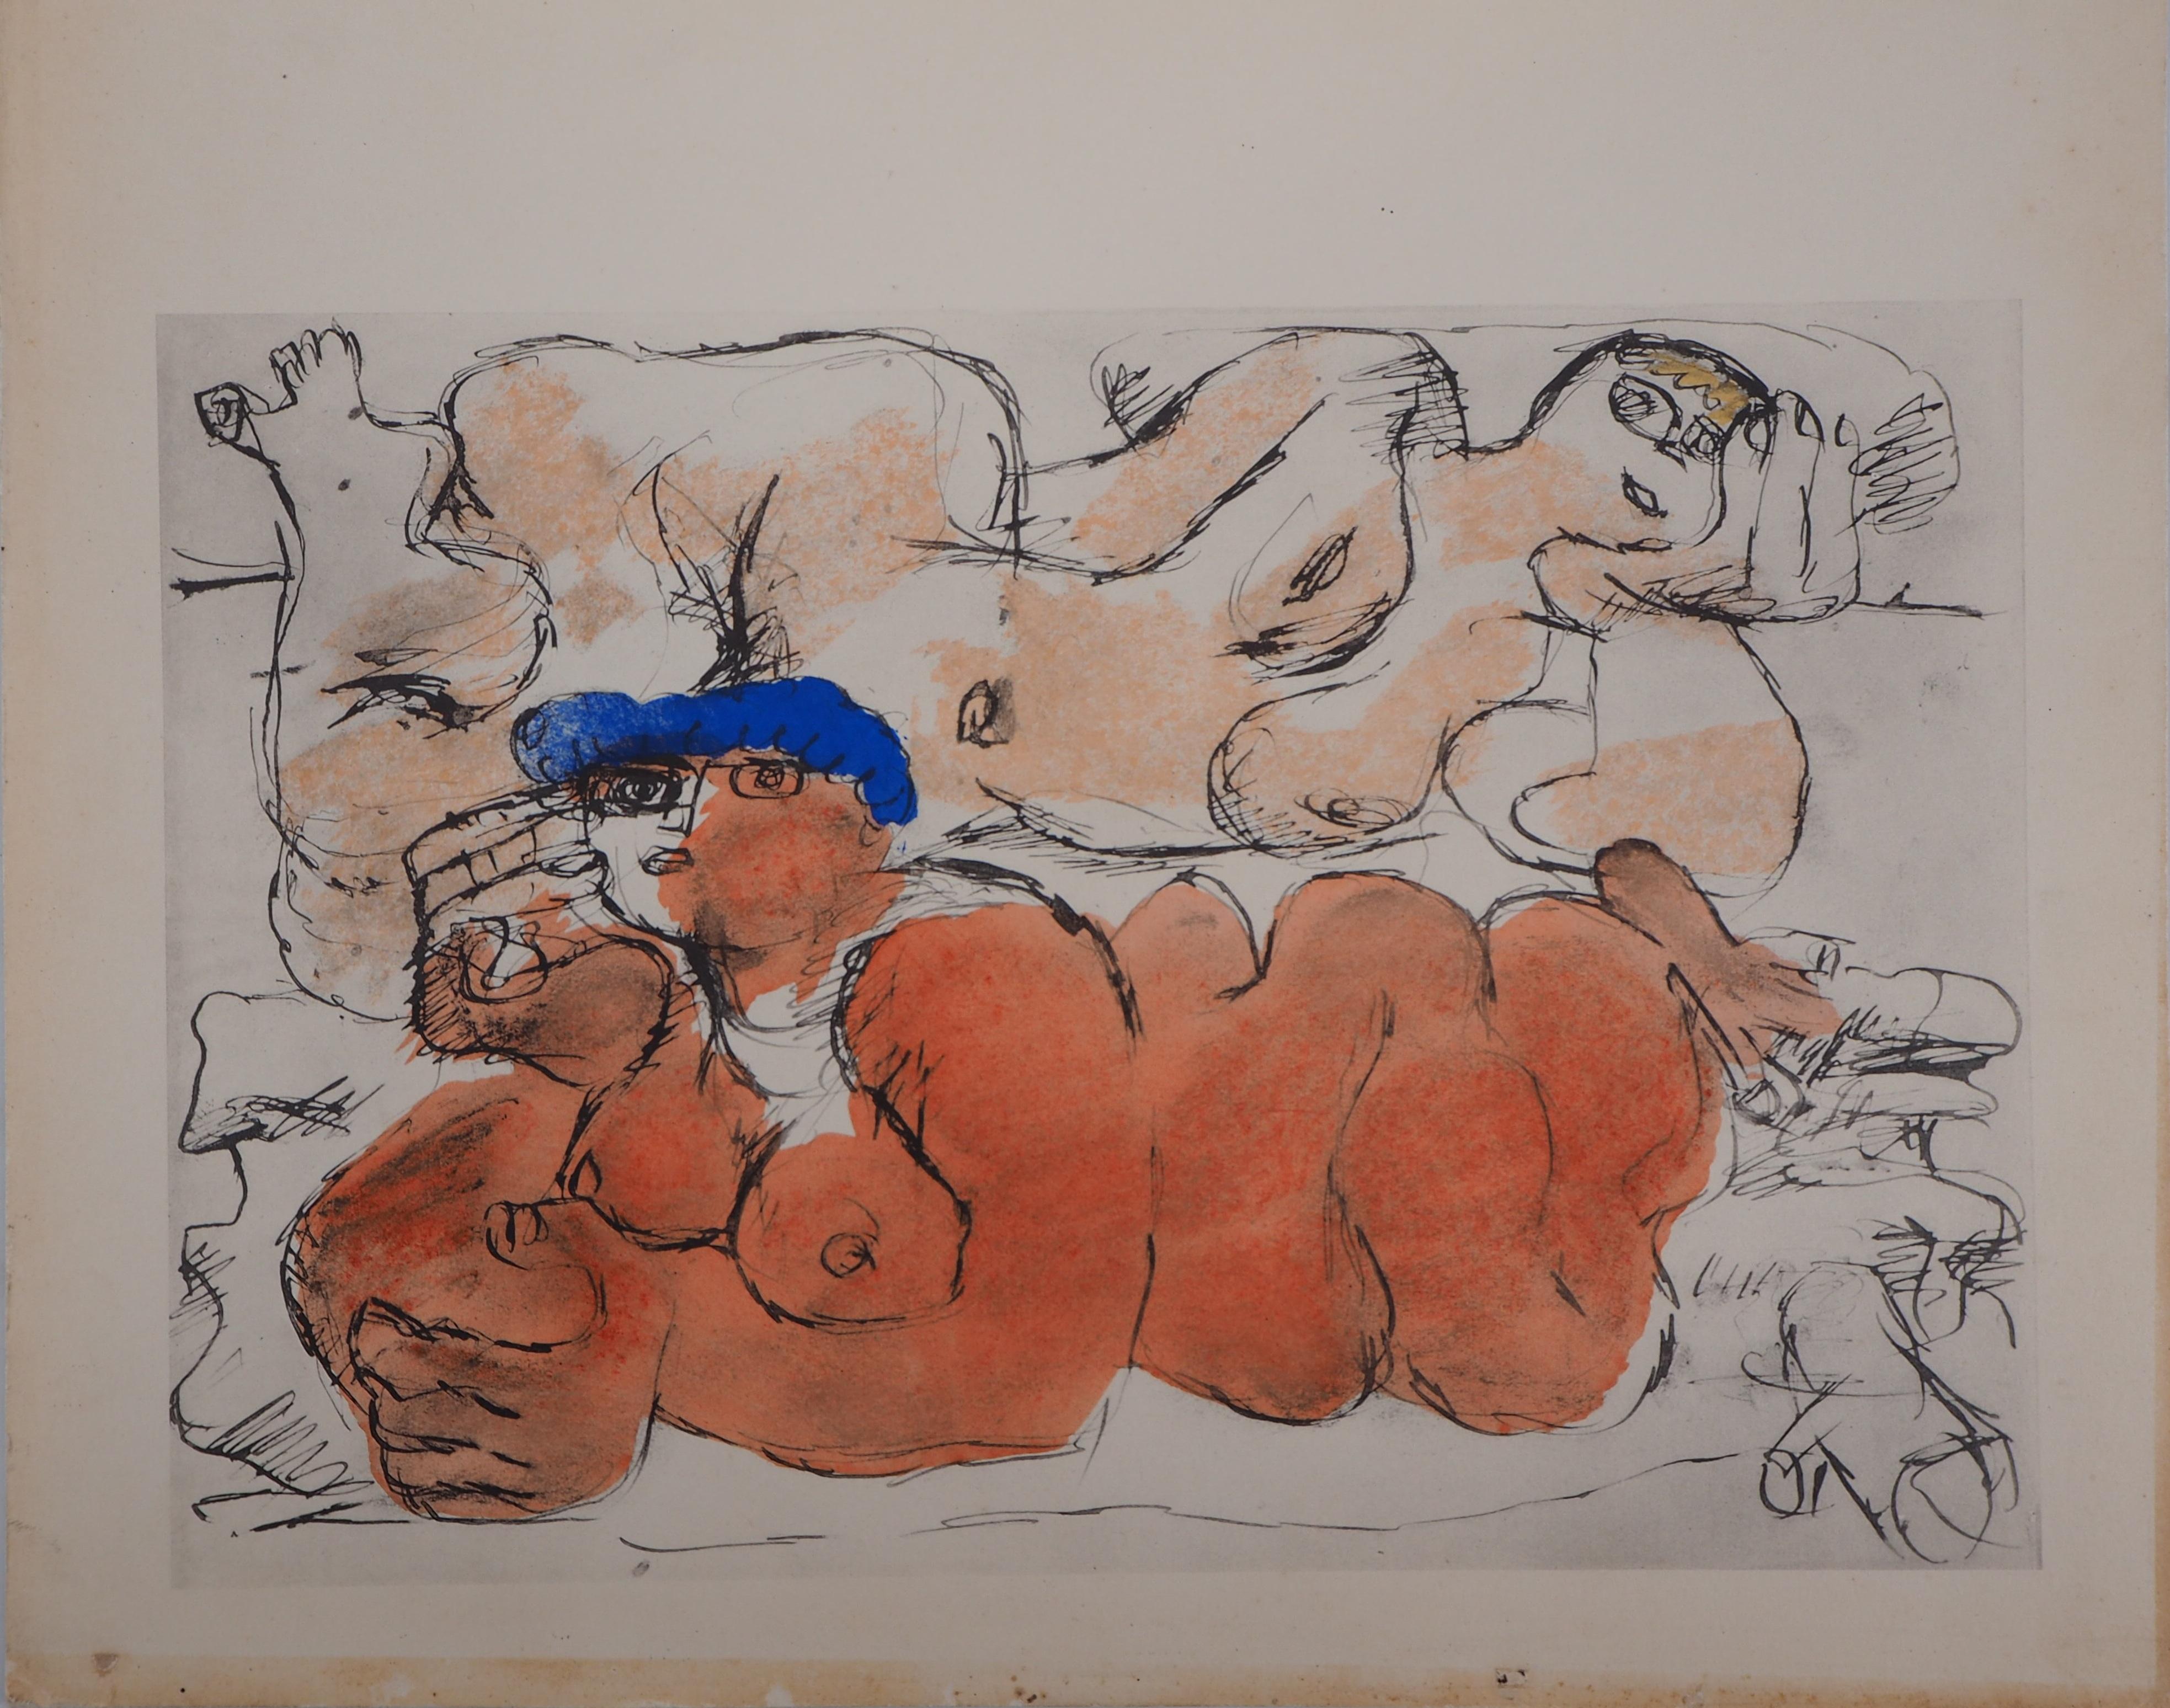 Le Corbusier (1887-1965)
The Rest, Two Reclining Nudes, 1938

Lithograph and watercolor stencil
On light vellum 21 x 27 cm (c. 8 x 11 inch)

Very good condition, paper lightly yellowed at the edge